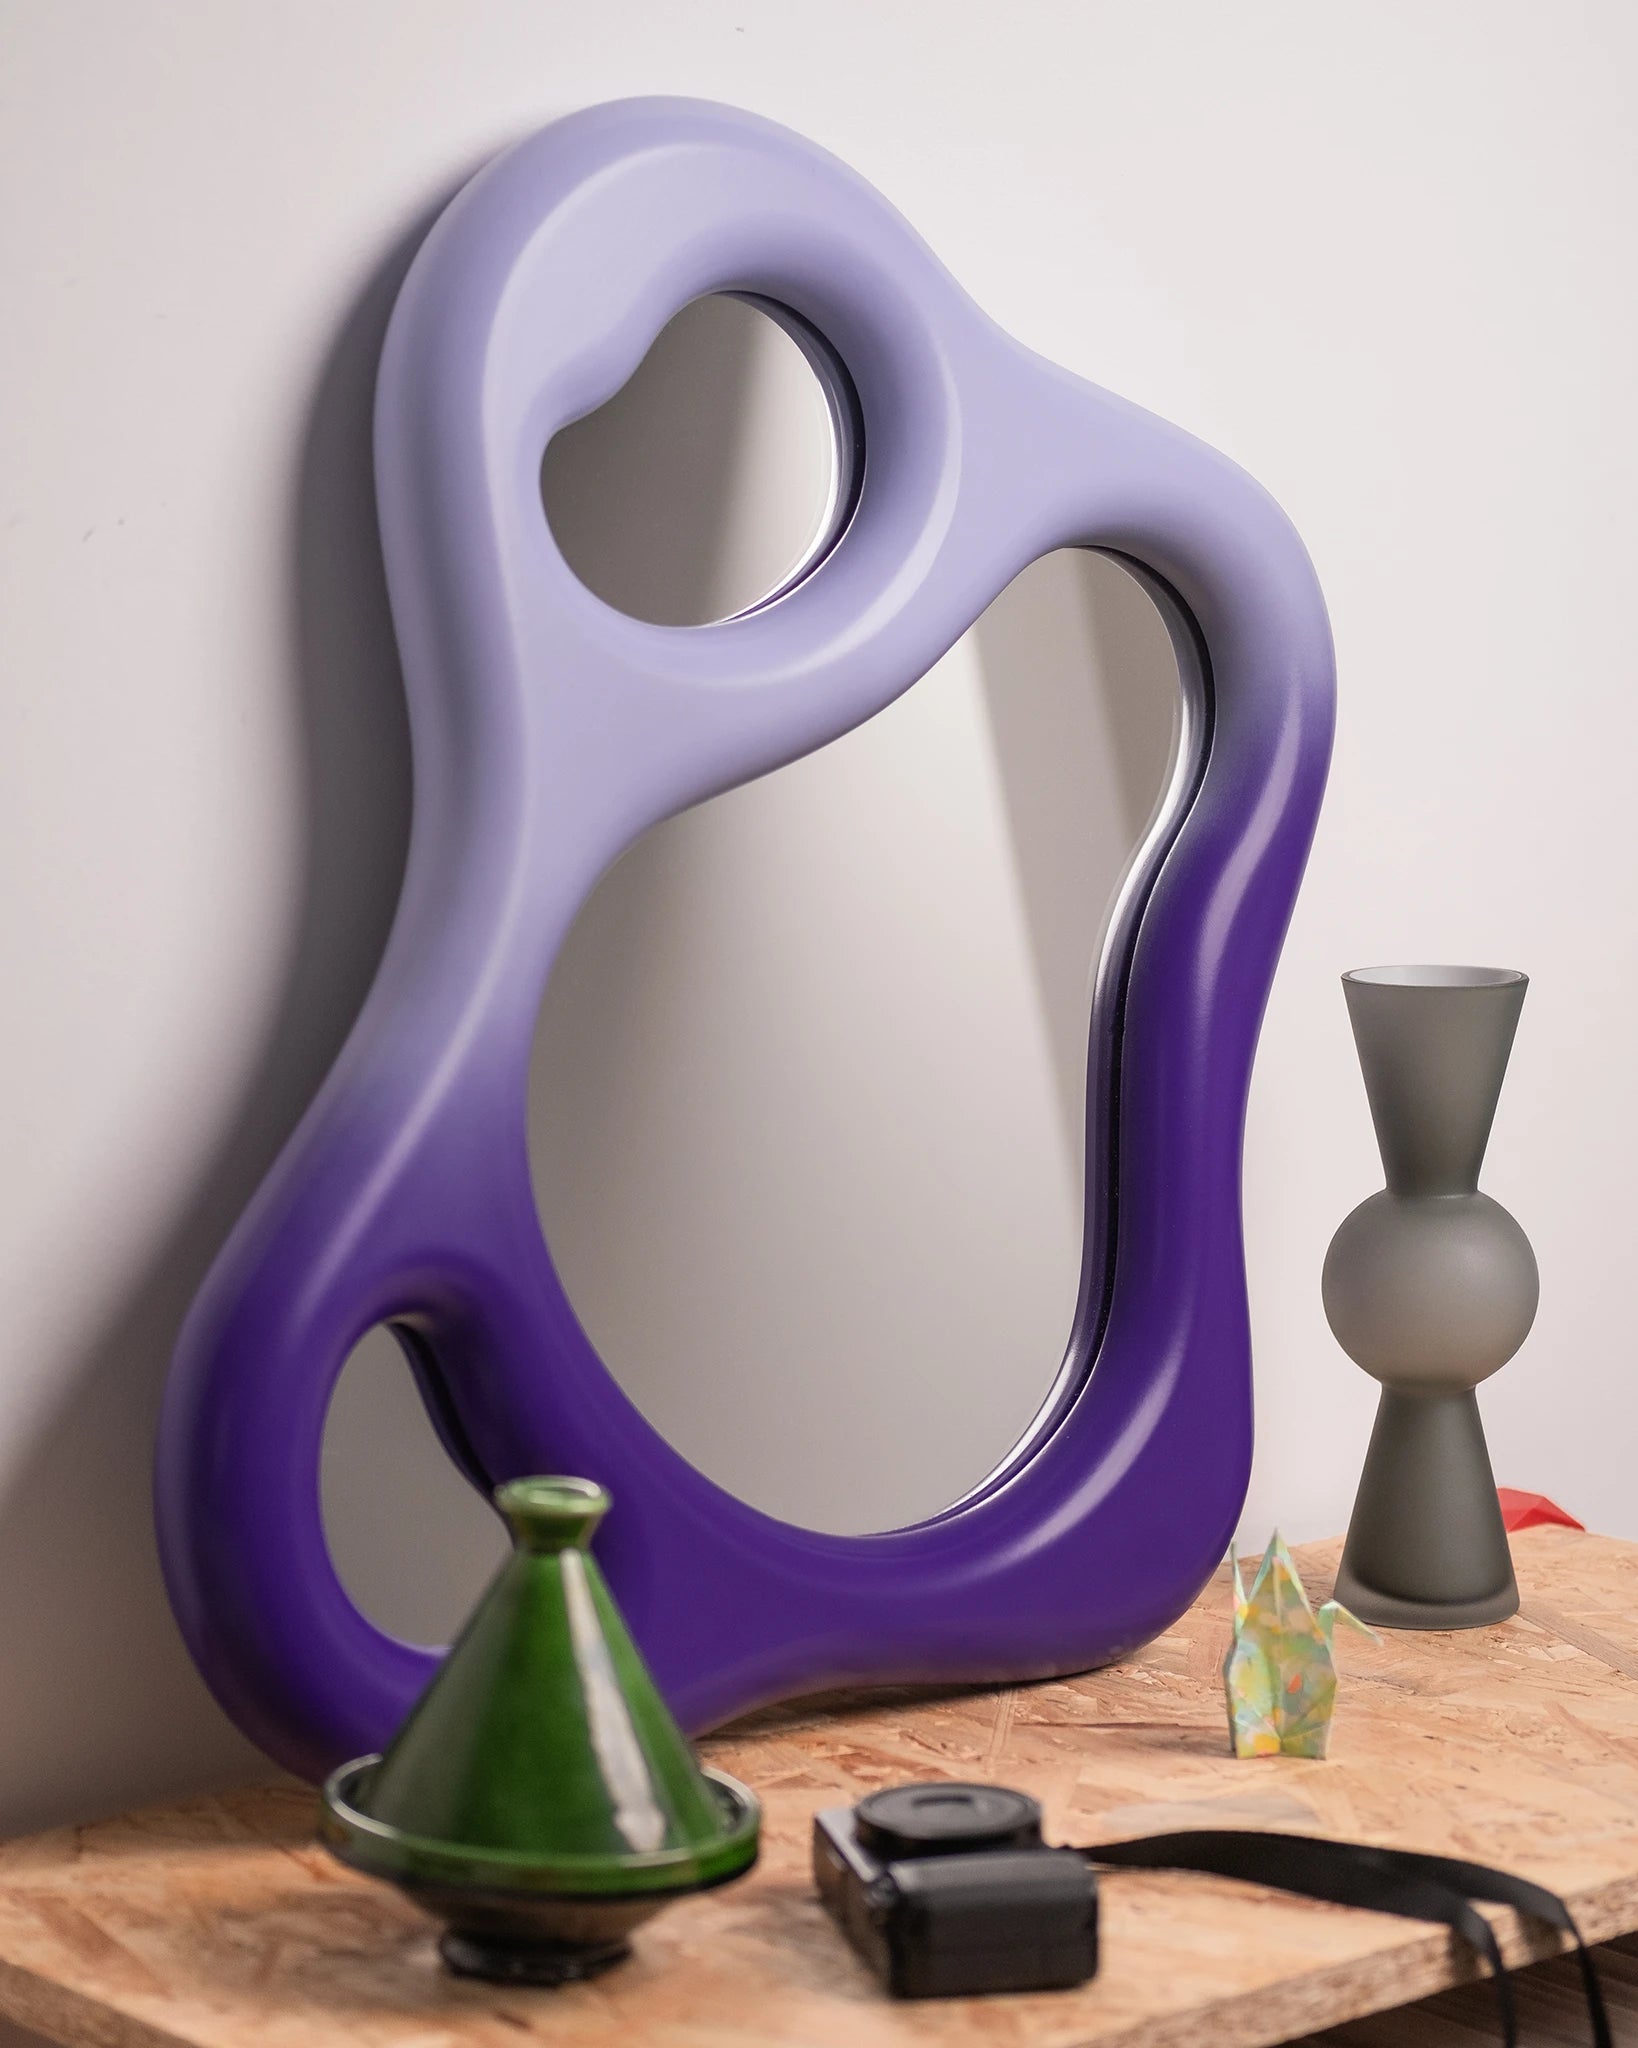 wall mirror in a domestic setting with soft edges and wooden frame, gradient purple lacquered